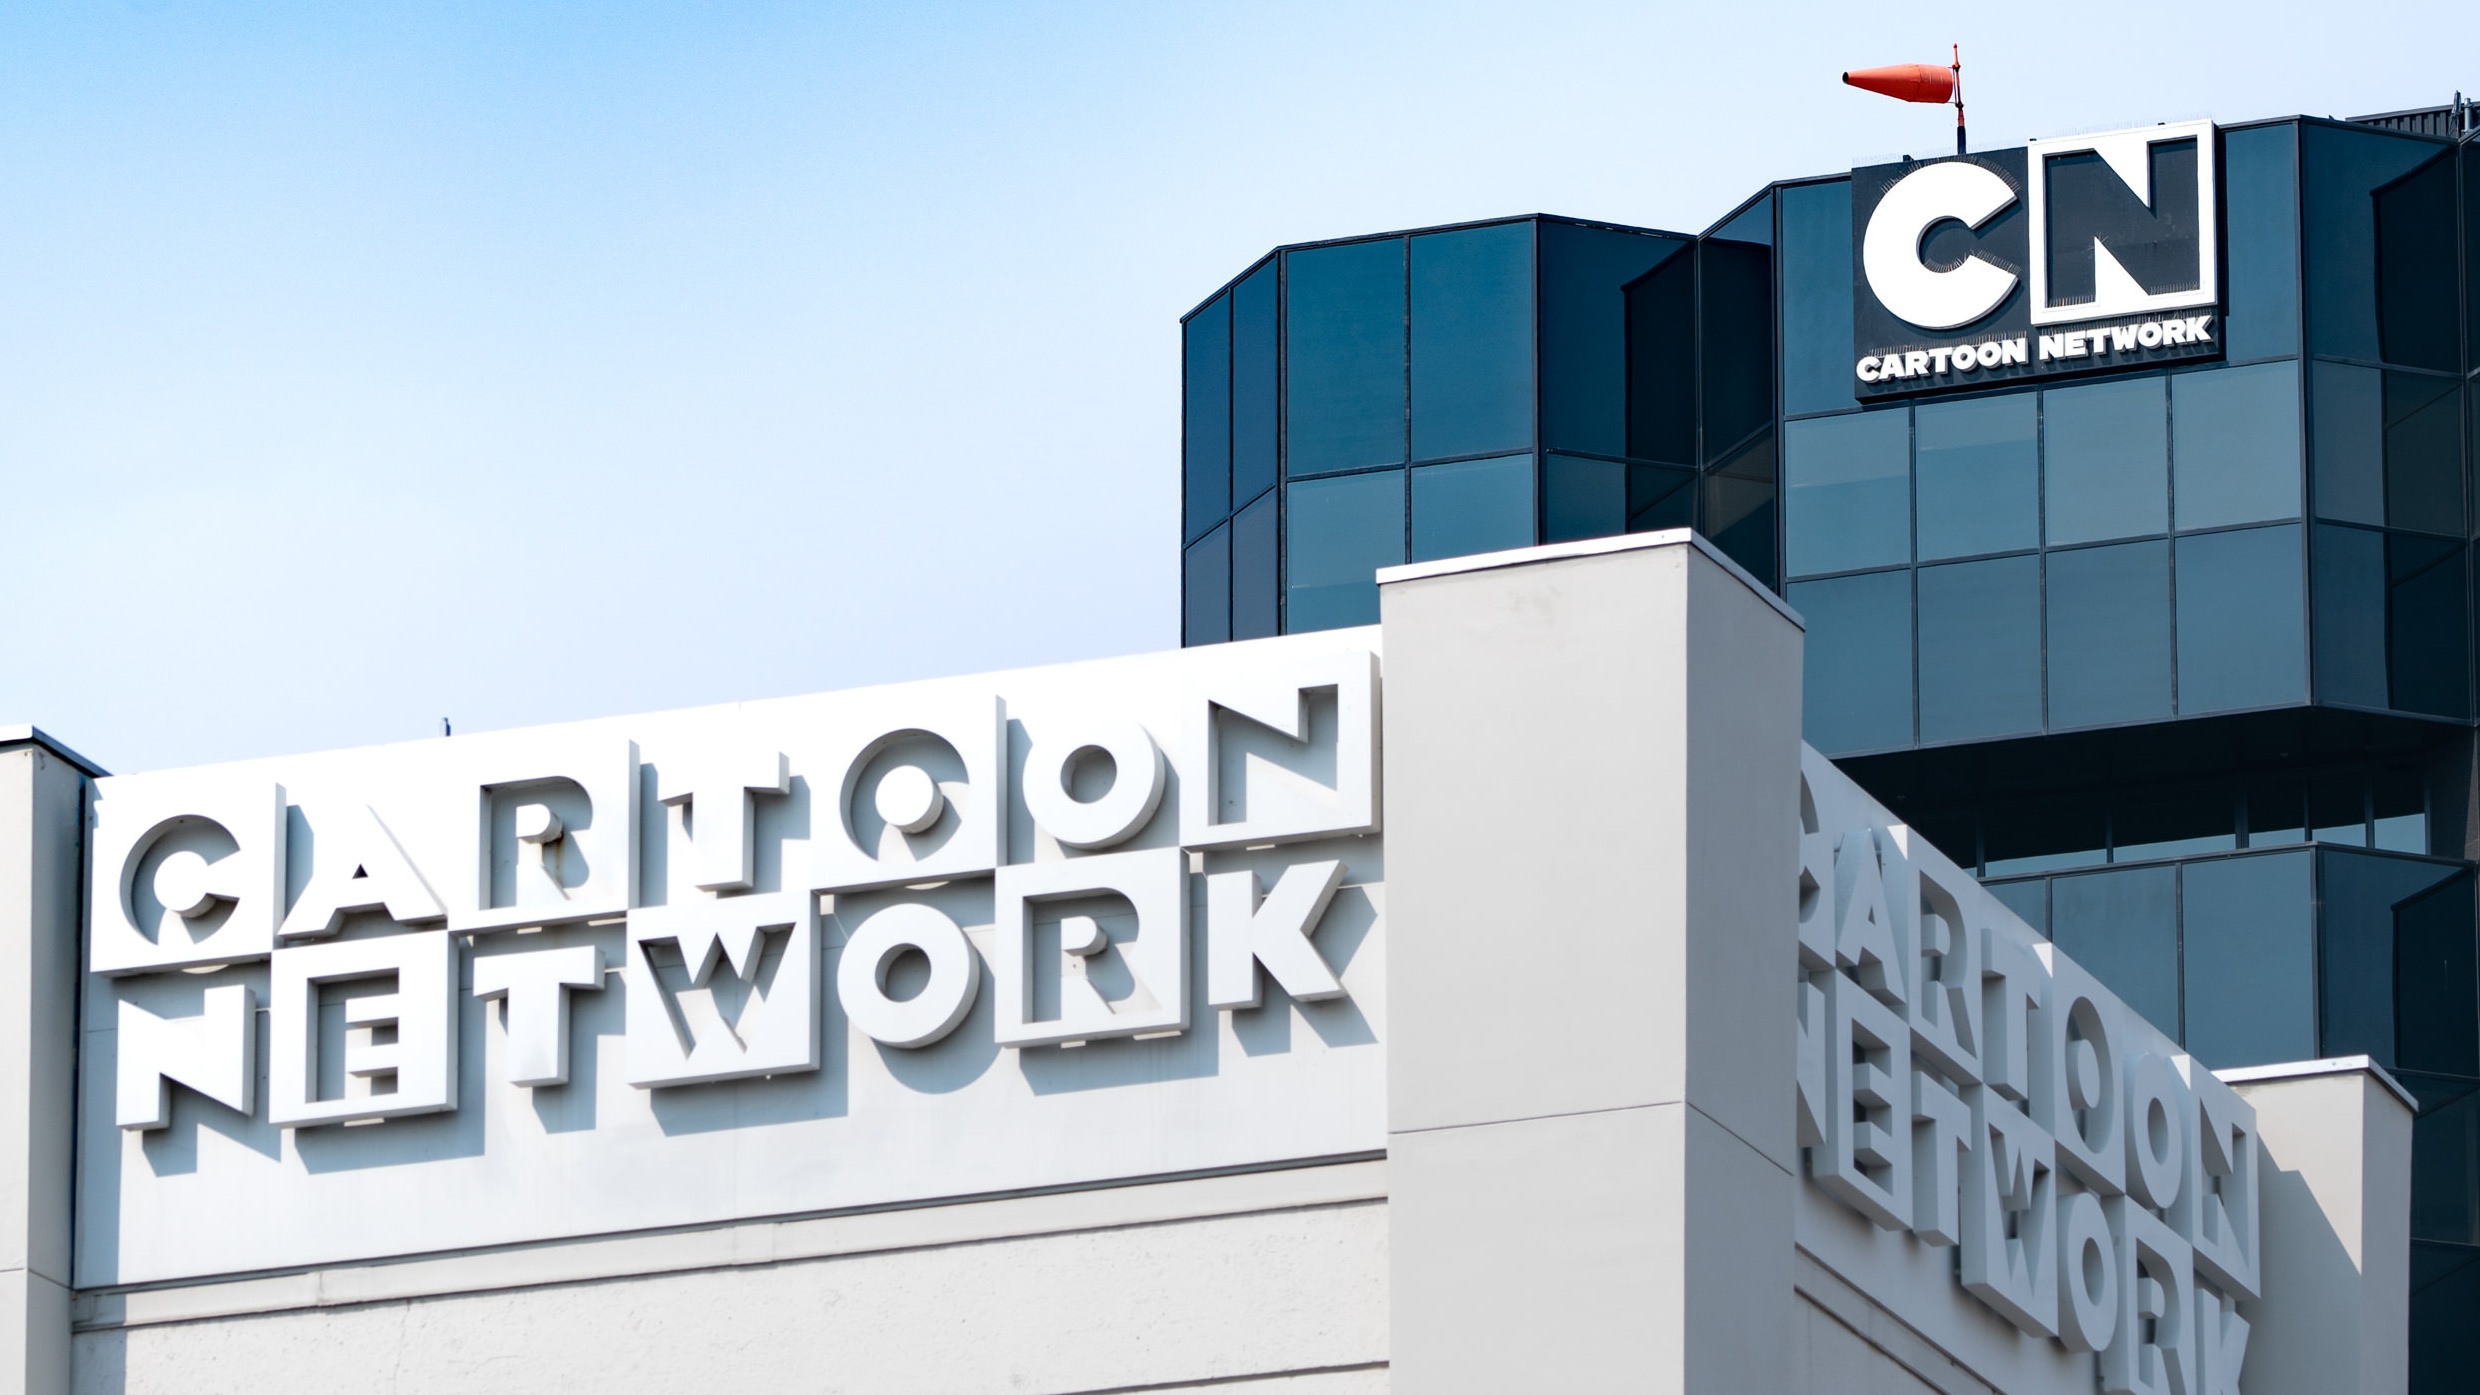 Changes Are Coming To Cartoon Network, But What Exactly Are They?